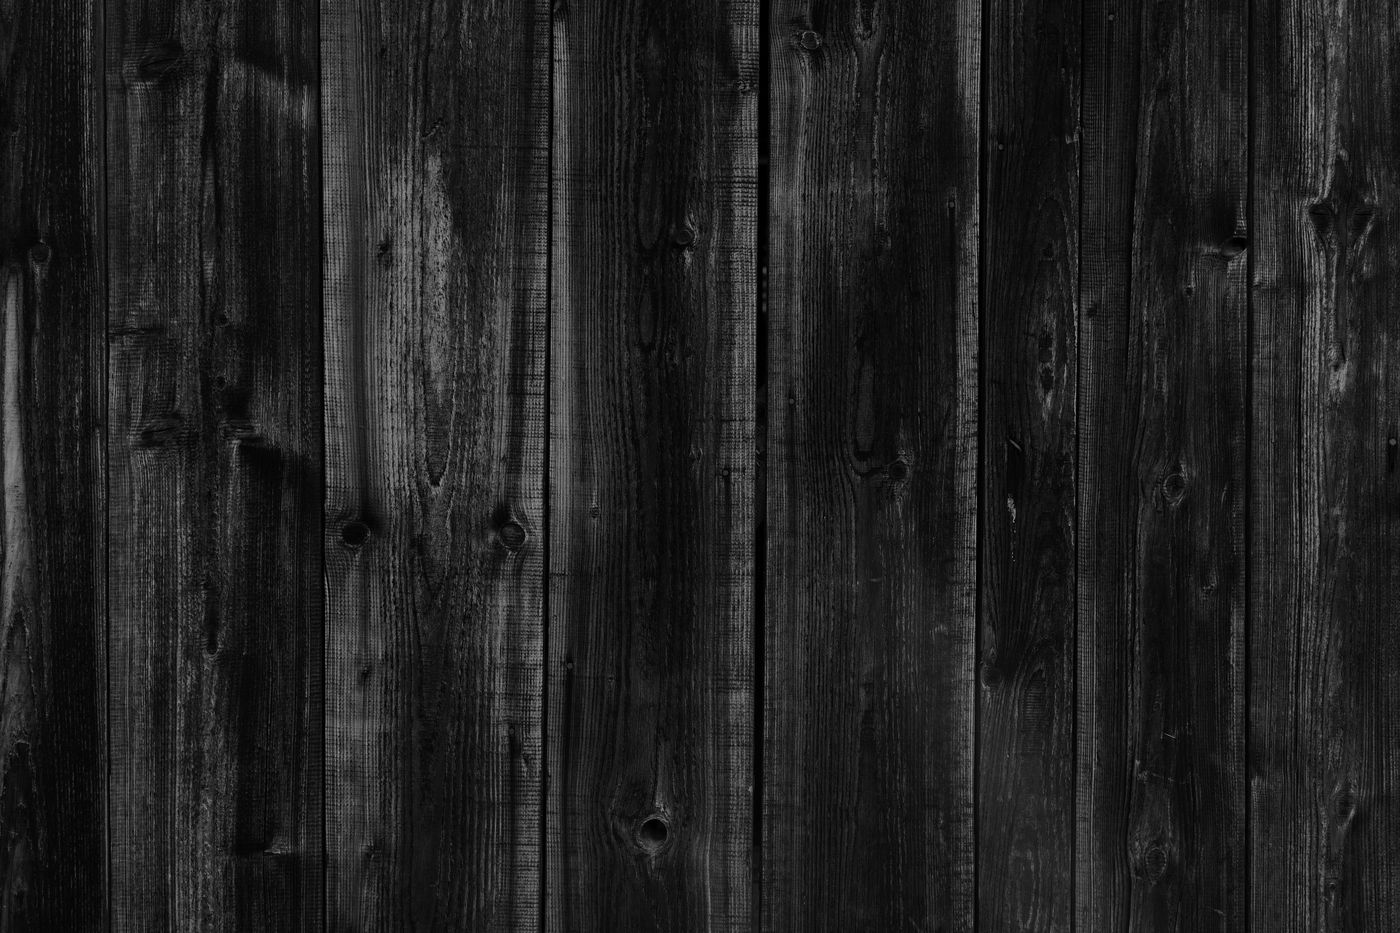 30 Black Wood Background Textures By Textures & Overlays ...